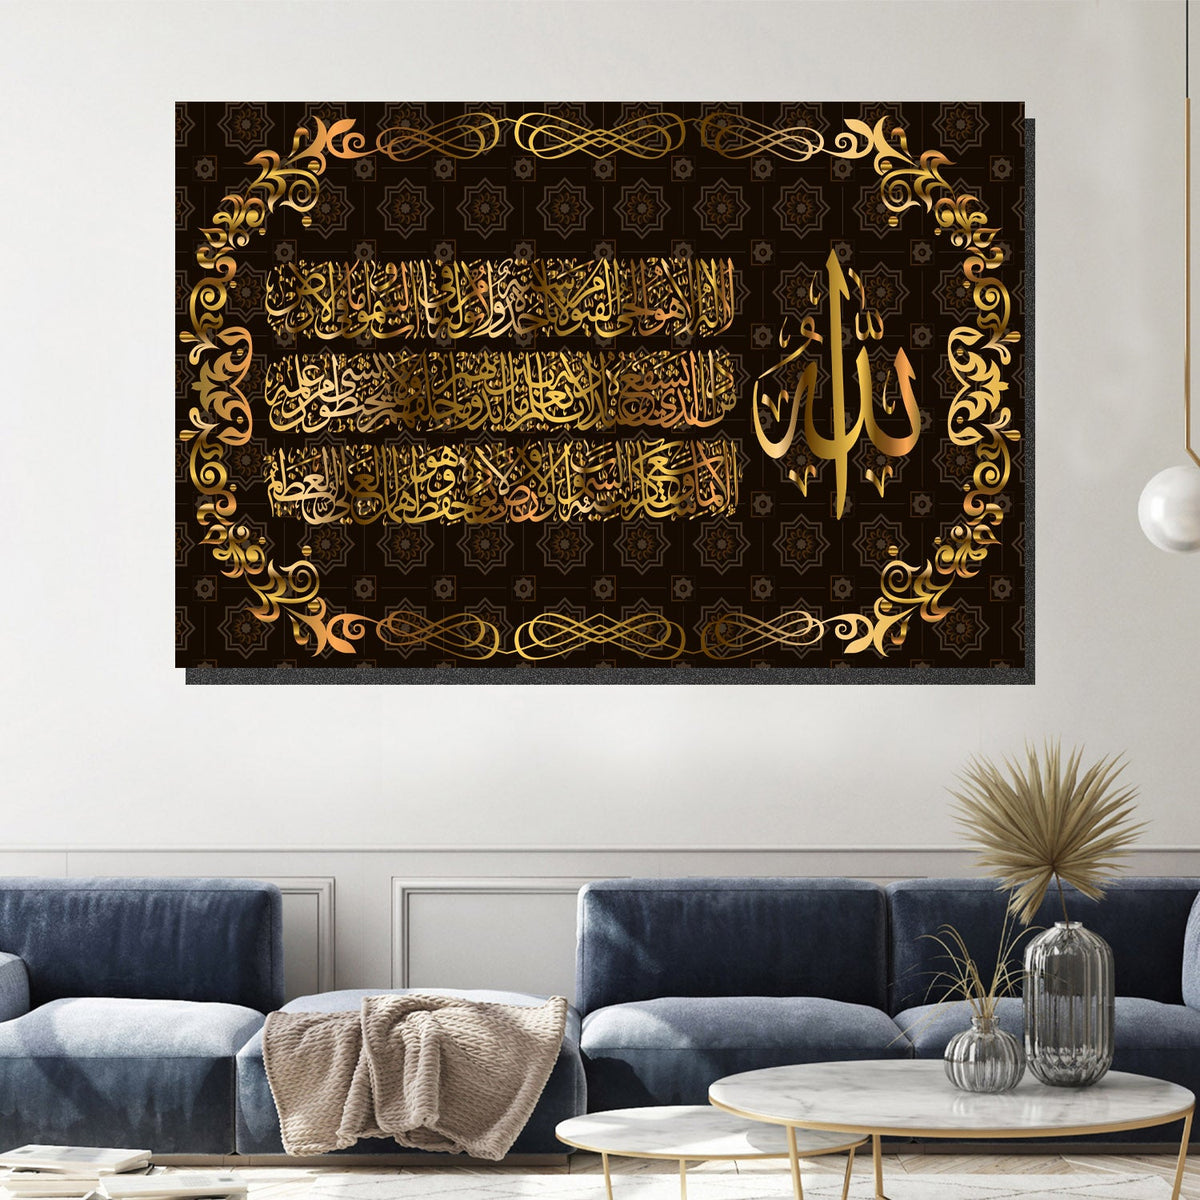 https://cdn.shopify.com/s/files/1/0387/9986/8044/products/ThroneofAllahCanvasArtprintStretched-3.jpg